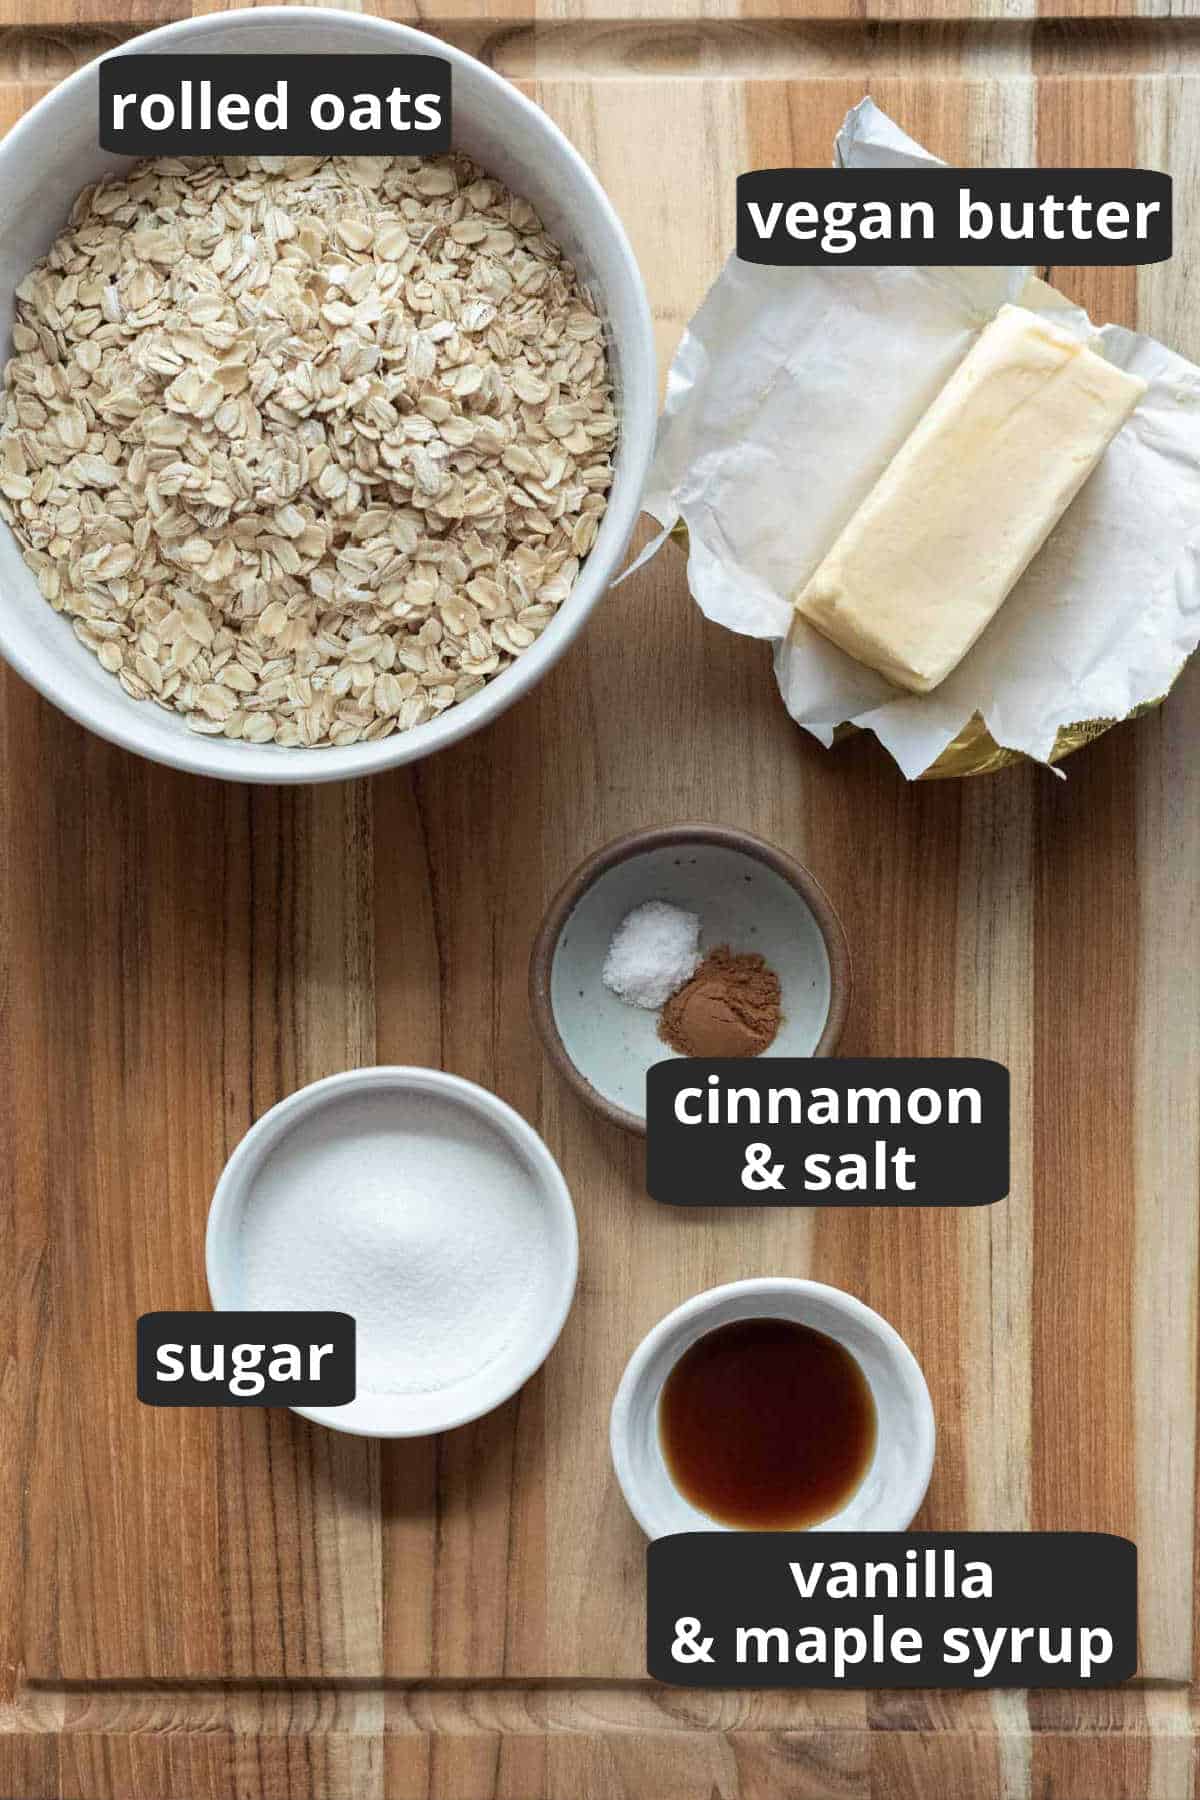 A labeled photo of the ingredients needed to make pie crust with oats.